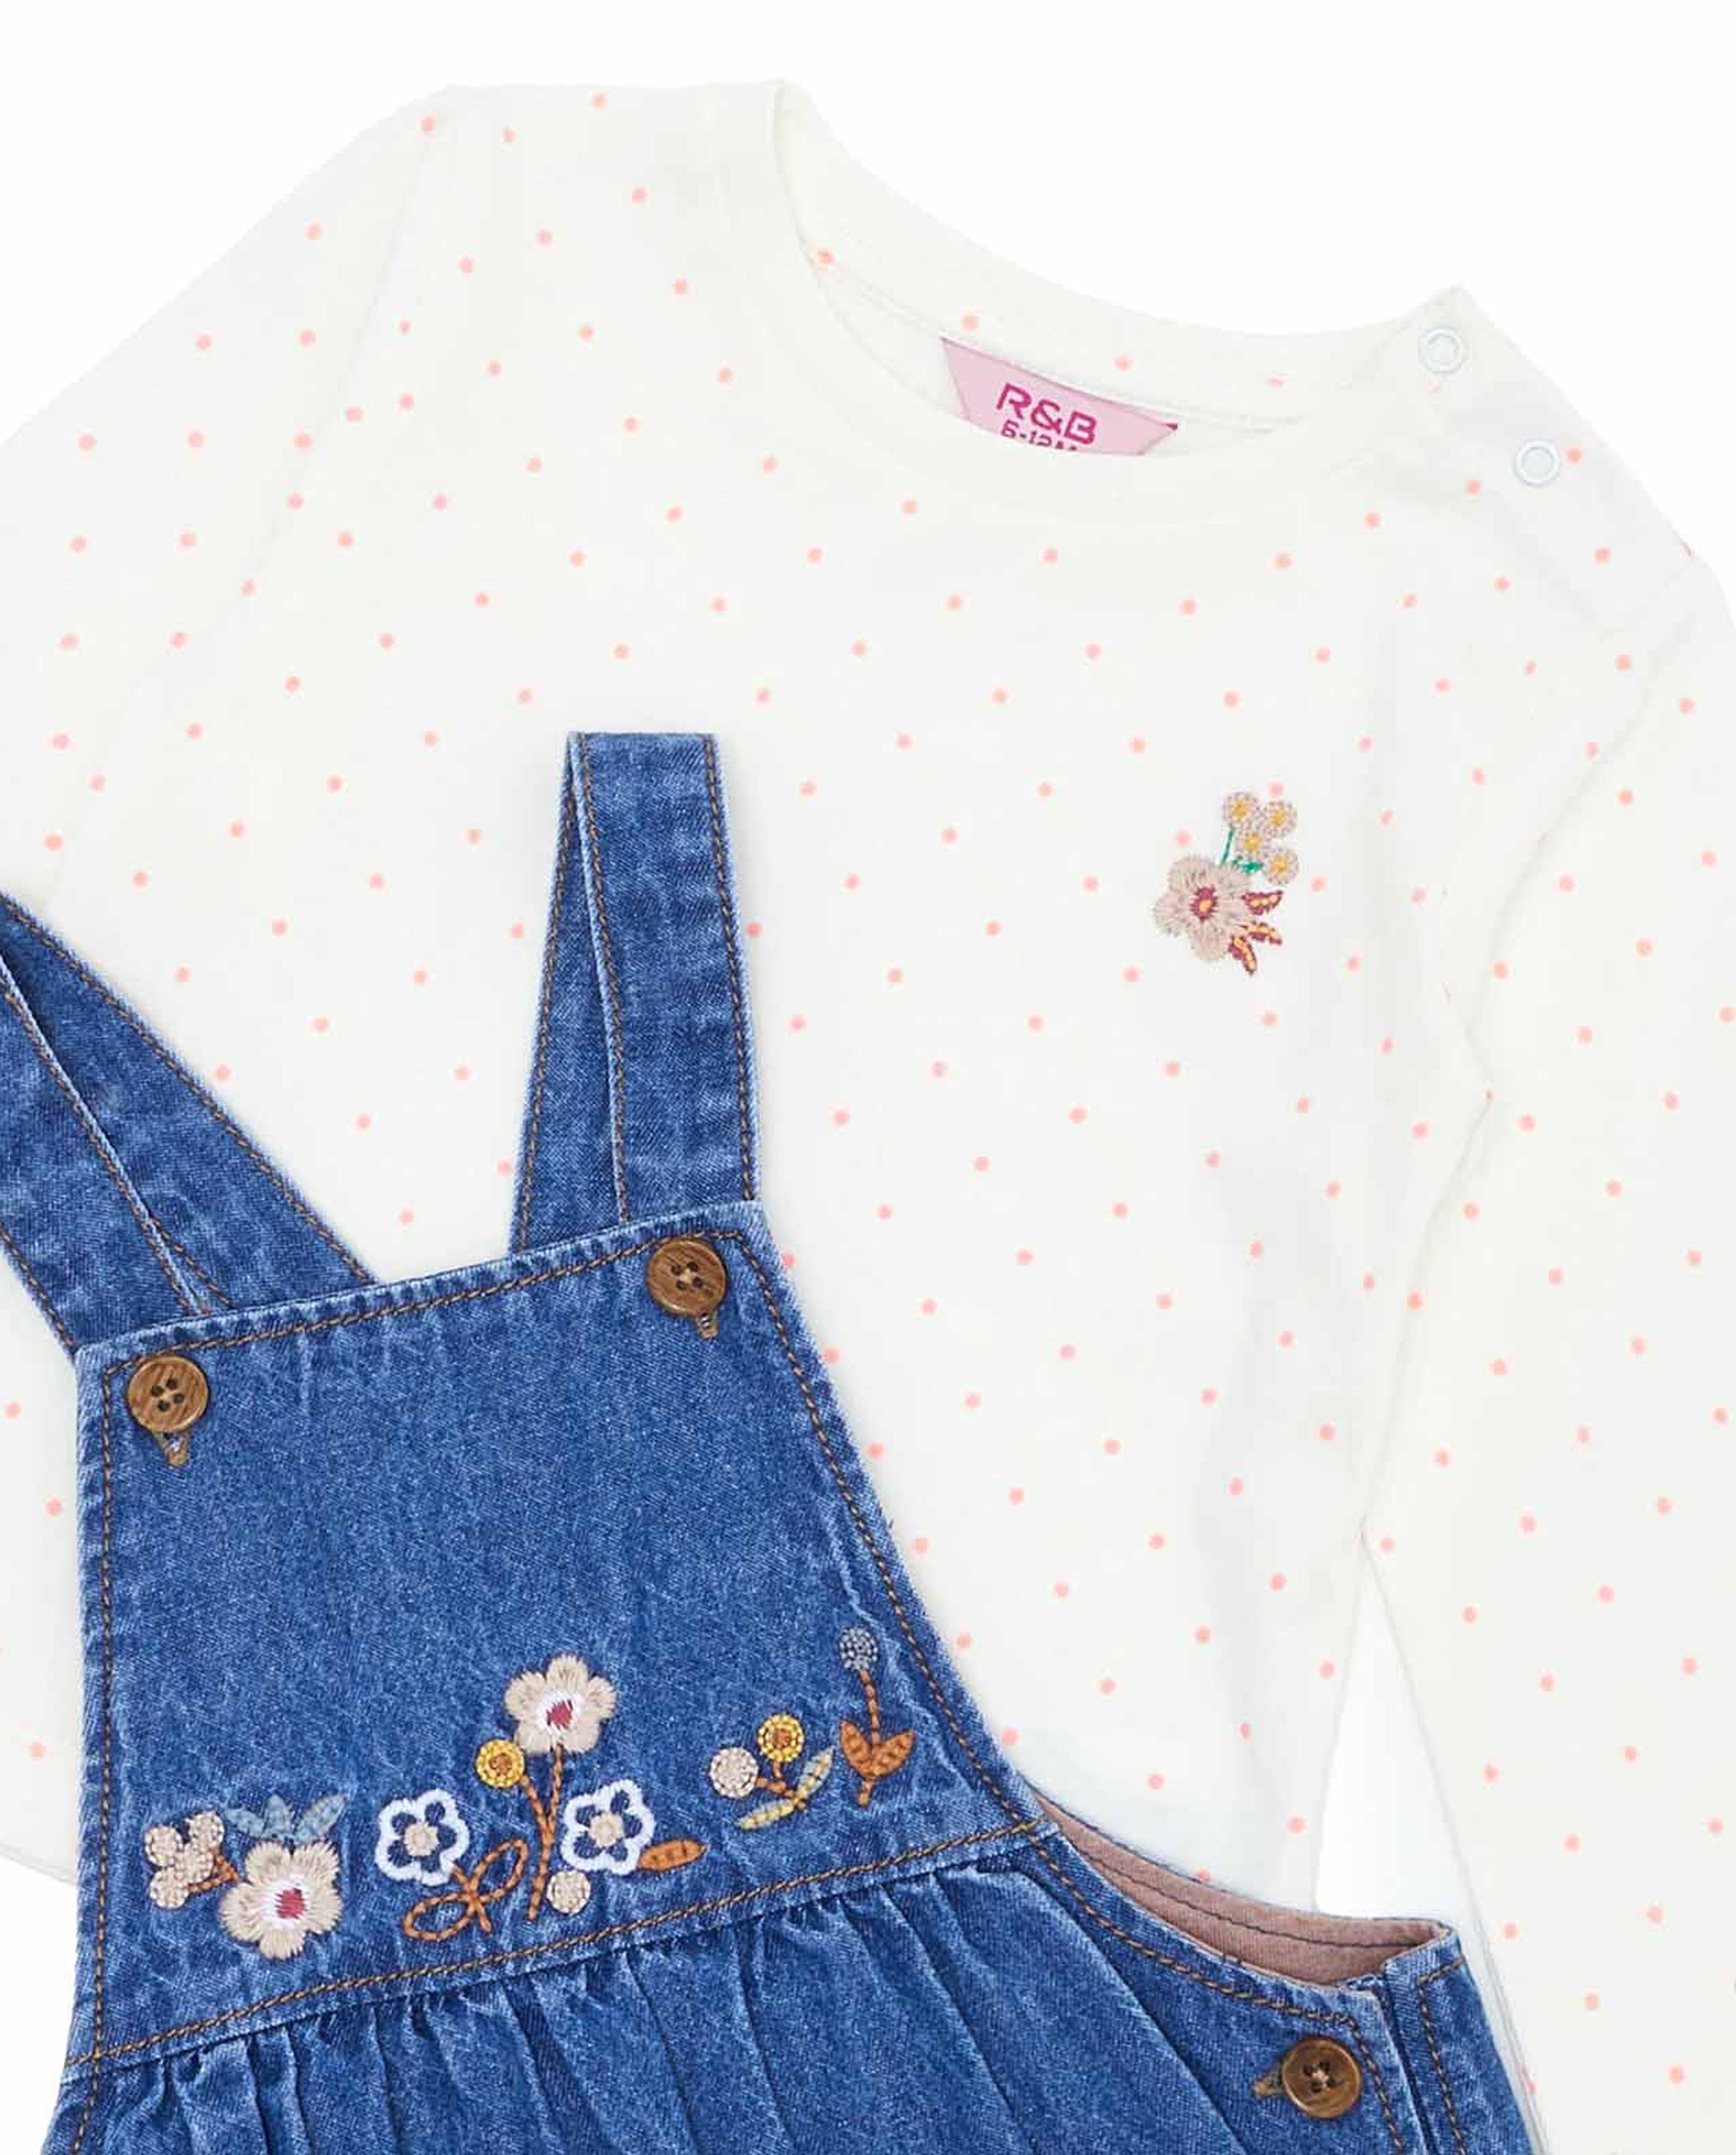 Polka Dots Top and Embroidered Denim Overalls